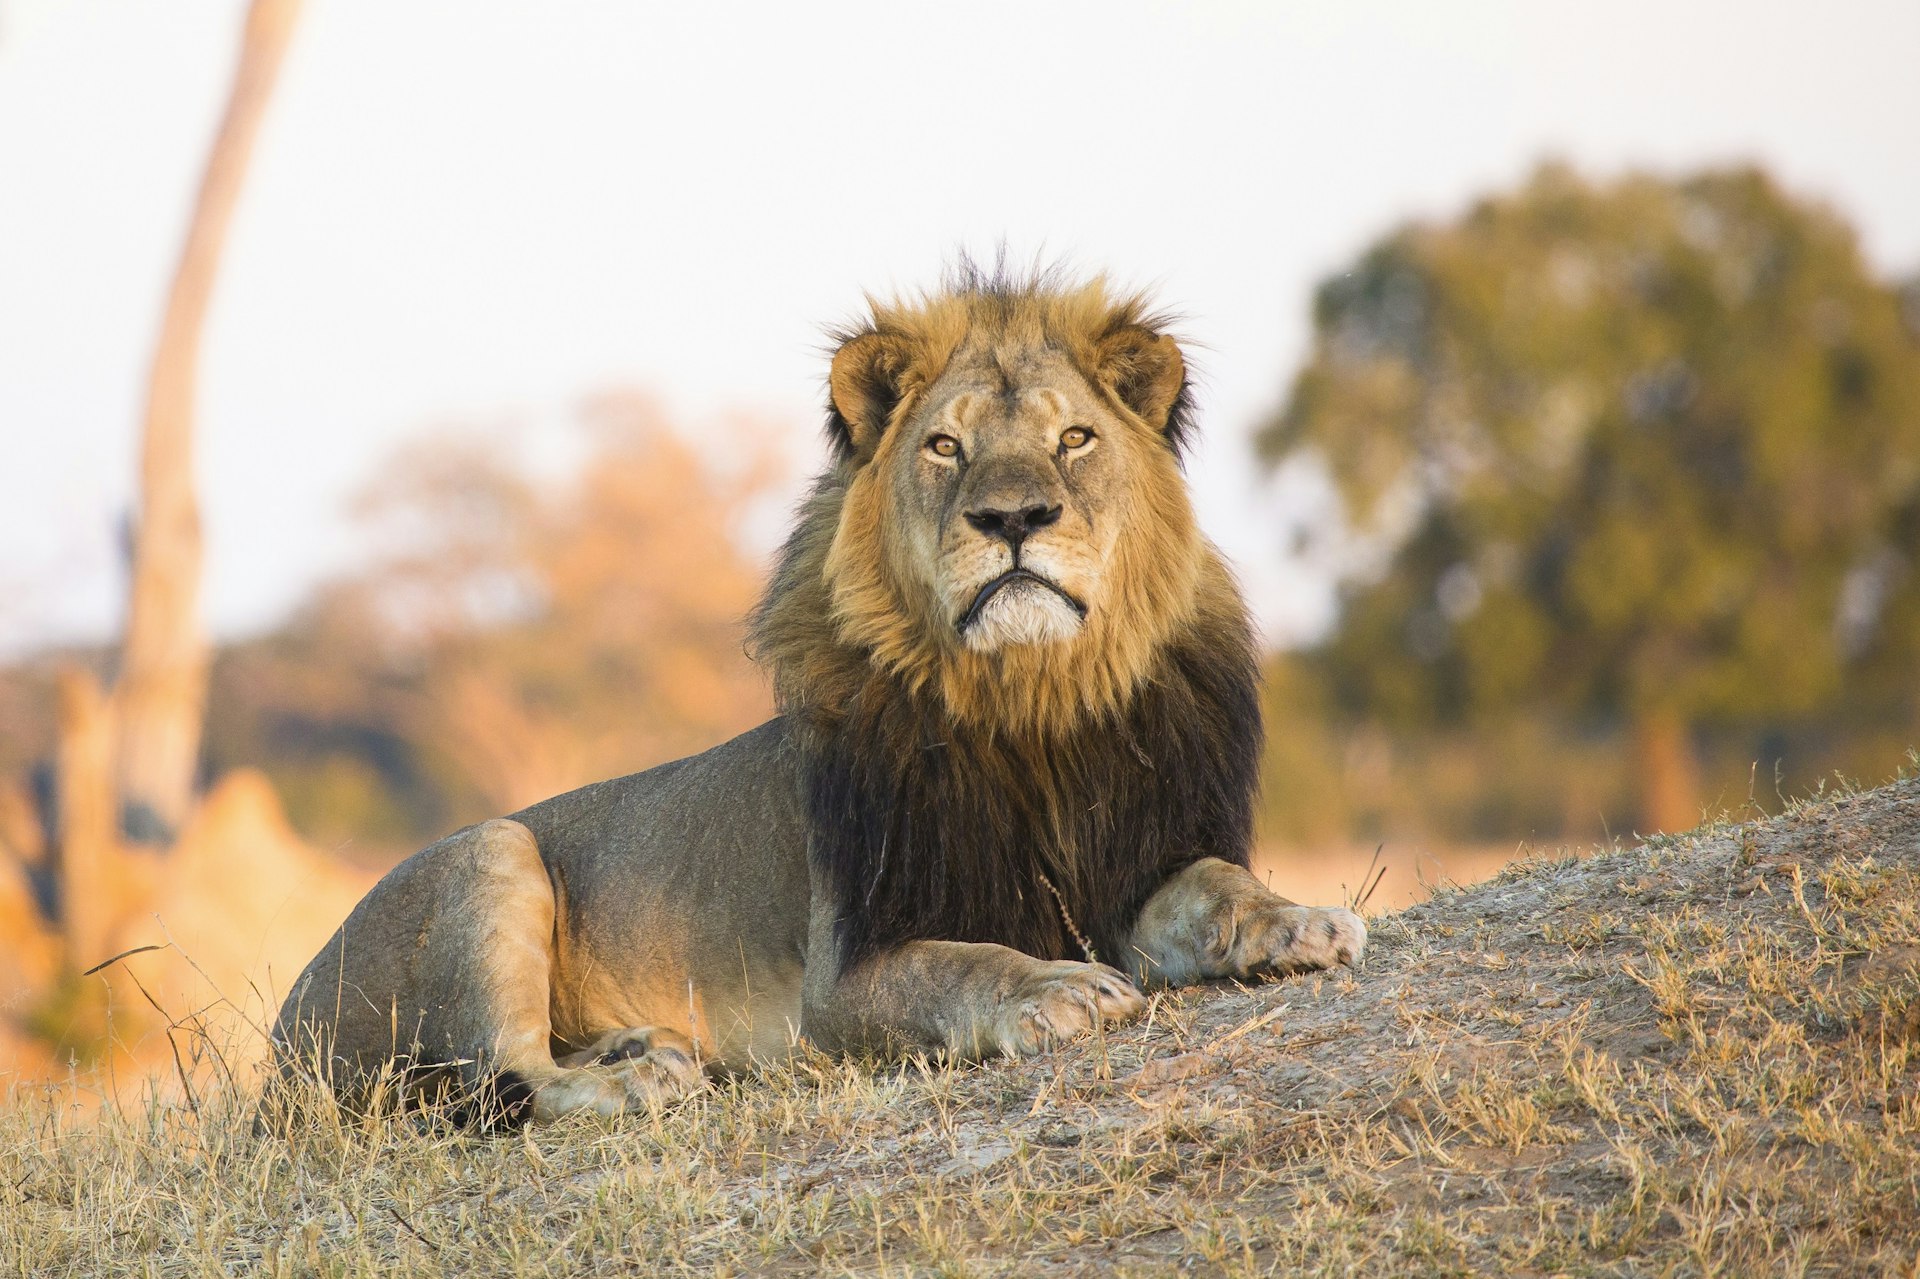 Cecil, a large male lion, lays on the dusty, sloping ground with his head up; his mane is dark brown and incredibly thick. There are a few trees in the background, but the landscape is very dry.